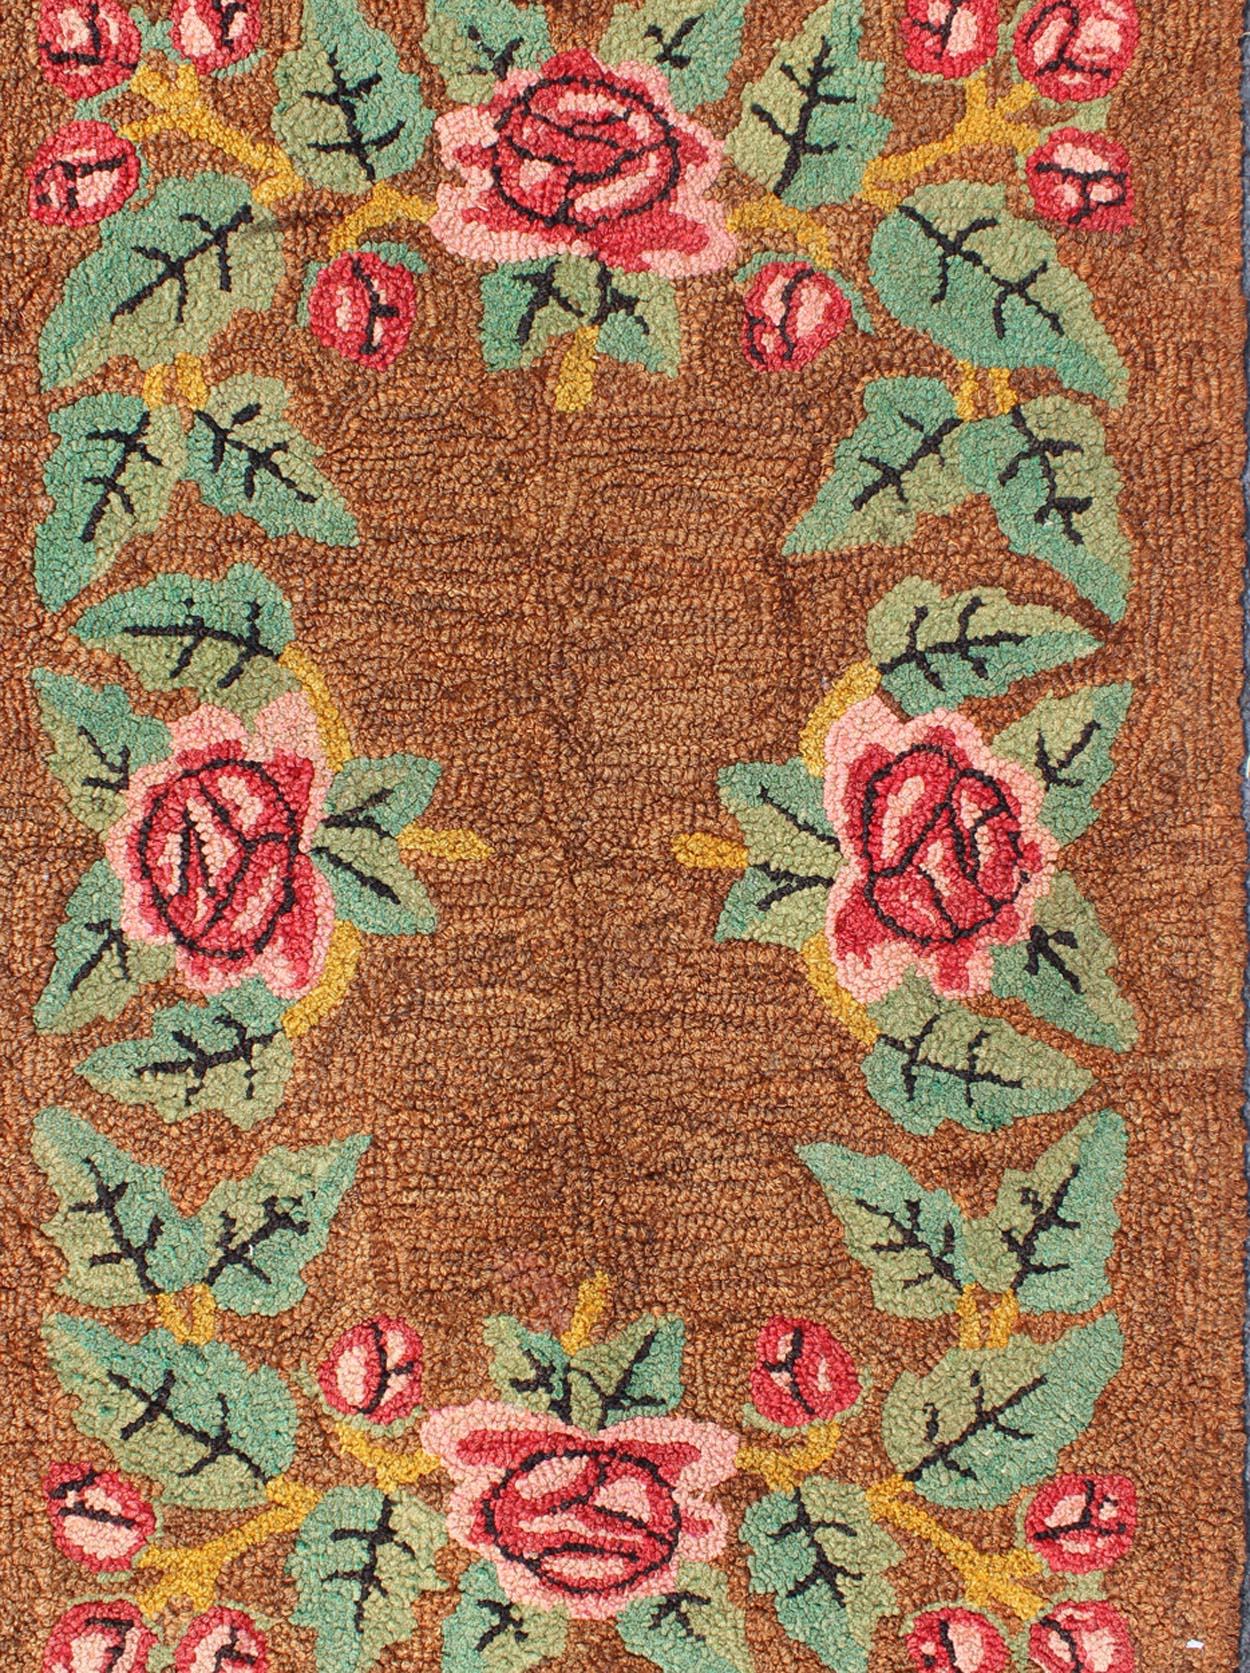 This colorful American Hooked rug depicts a variety of vines and blossoming flowers in an assortment of colors extending throughout the light orange and tan background. The colors in the flowers are marigold, rose, pink, greens and